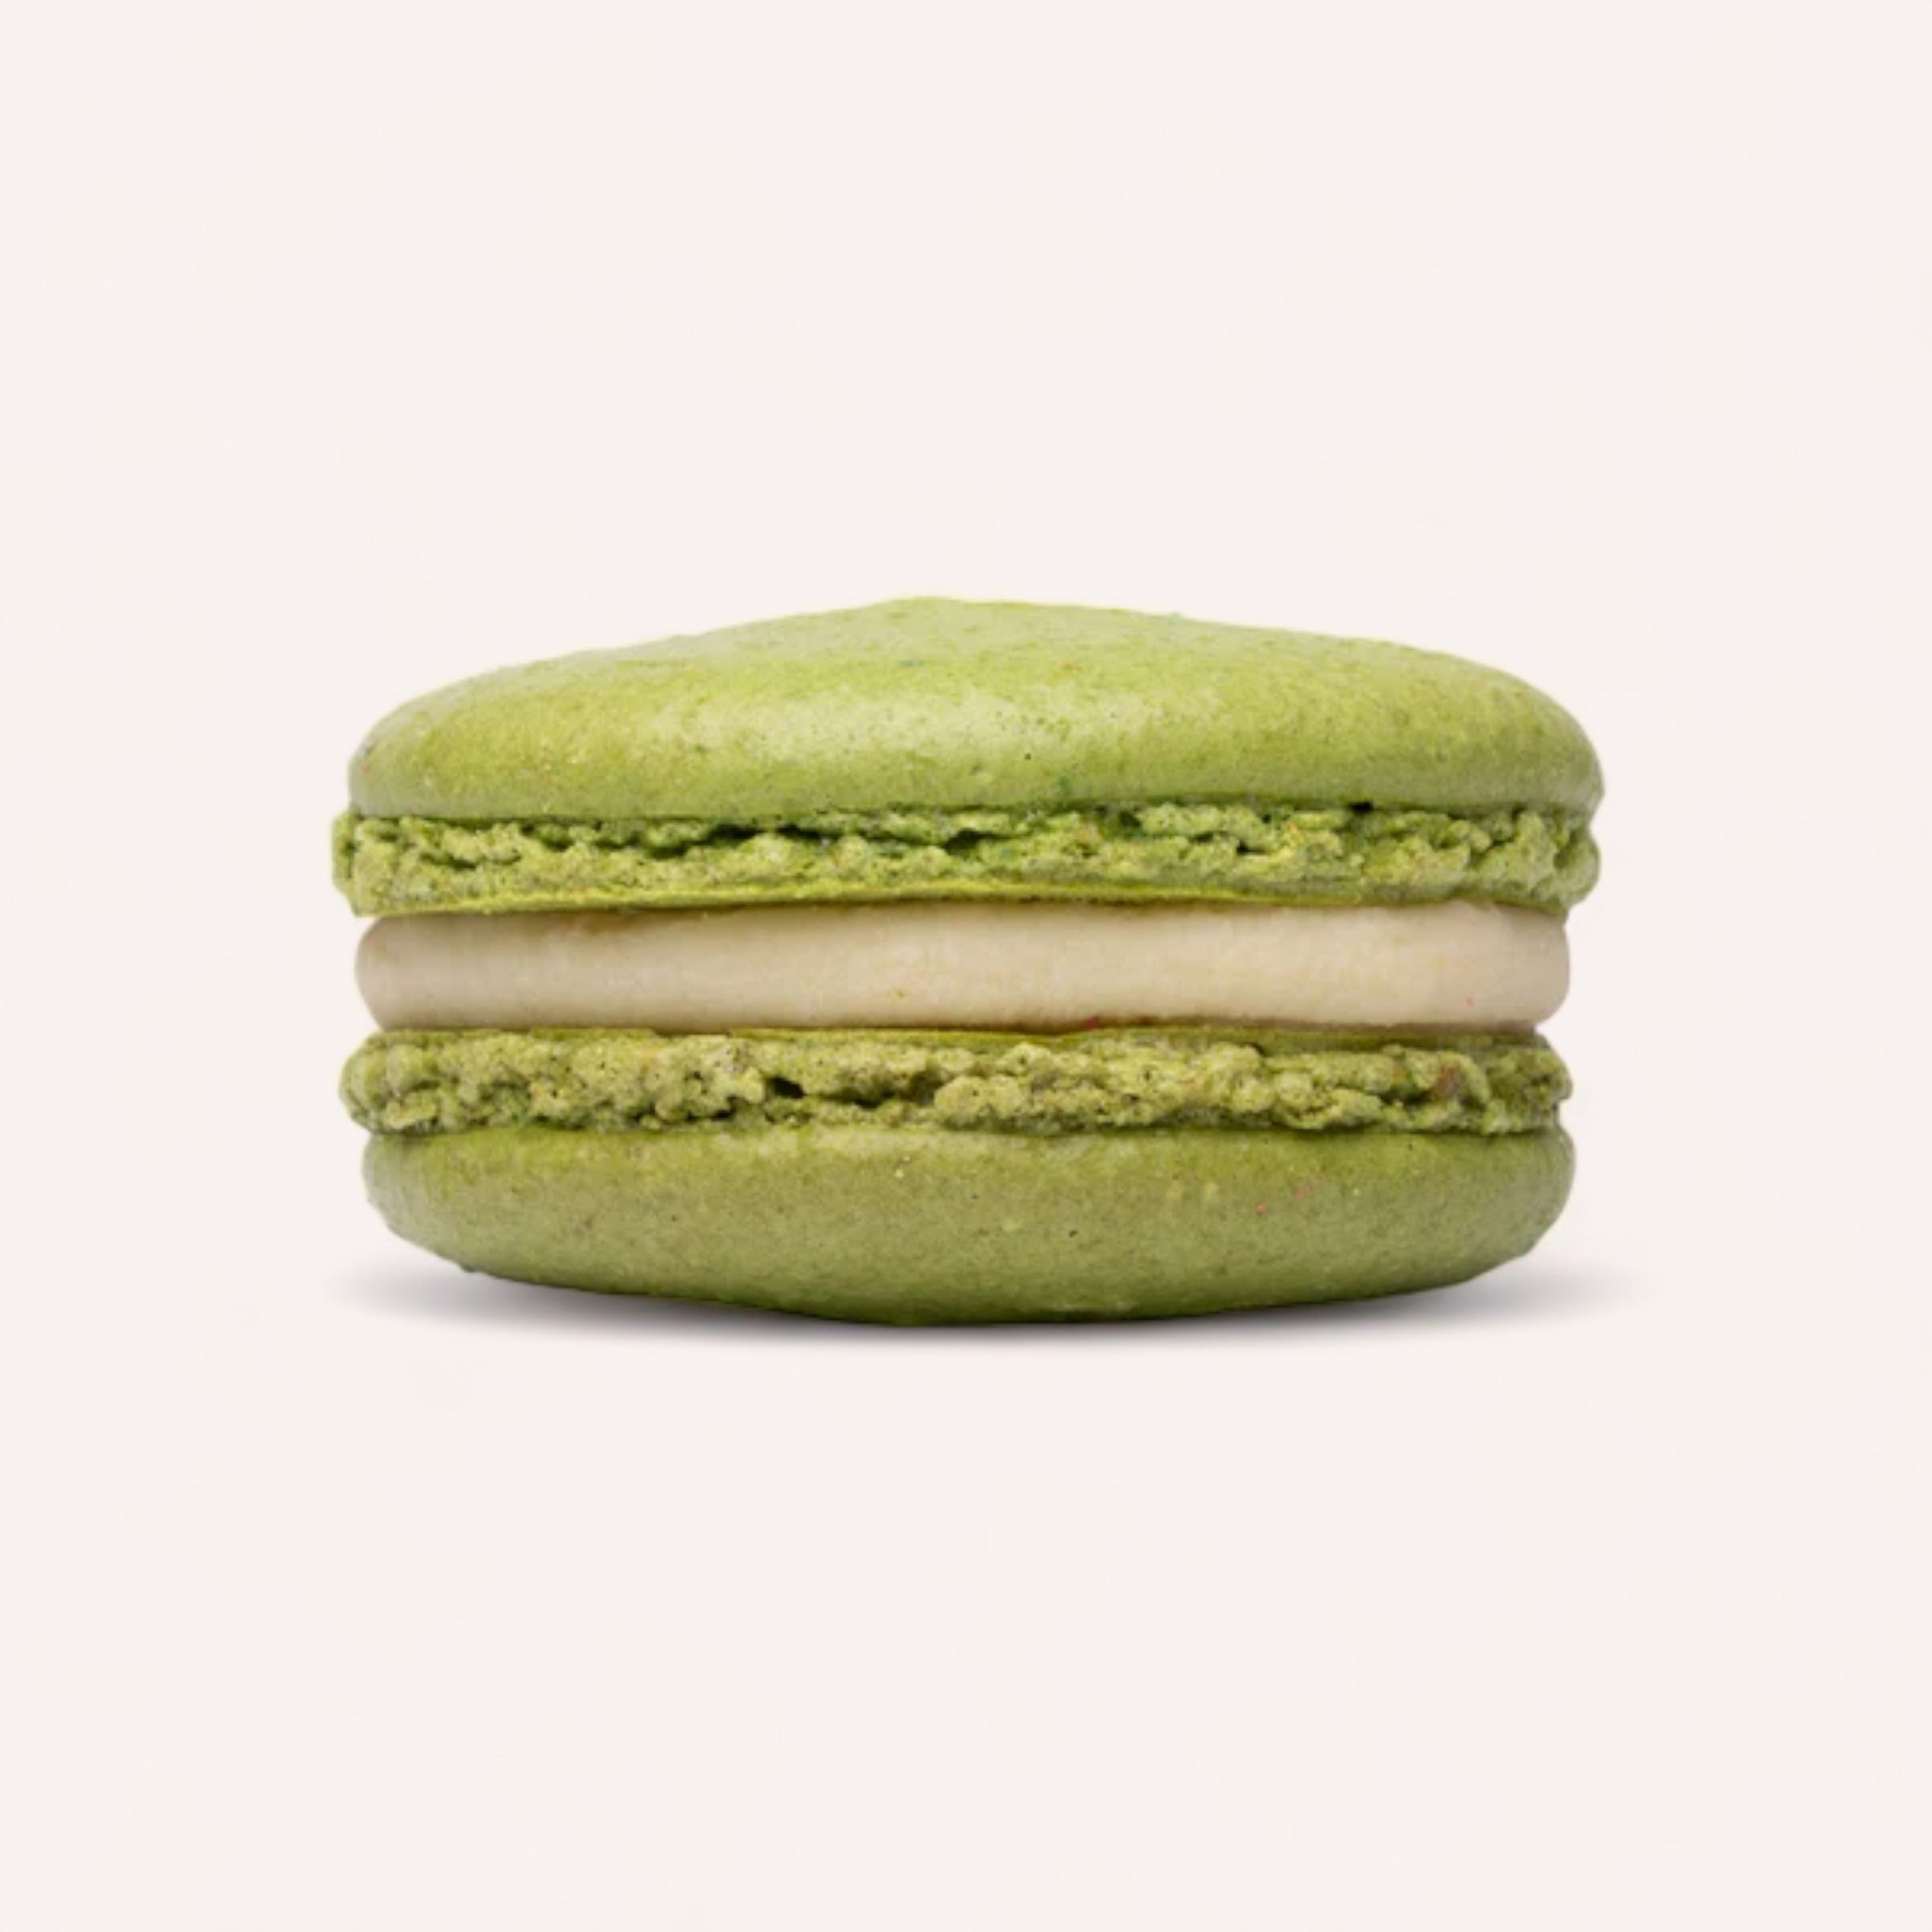 A single handmade green Box of 6 Macarons by J'aime les Macarons with a cream filling isolated on a white background.